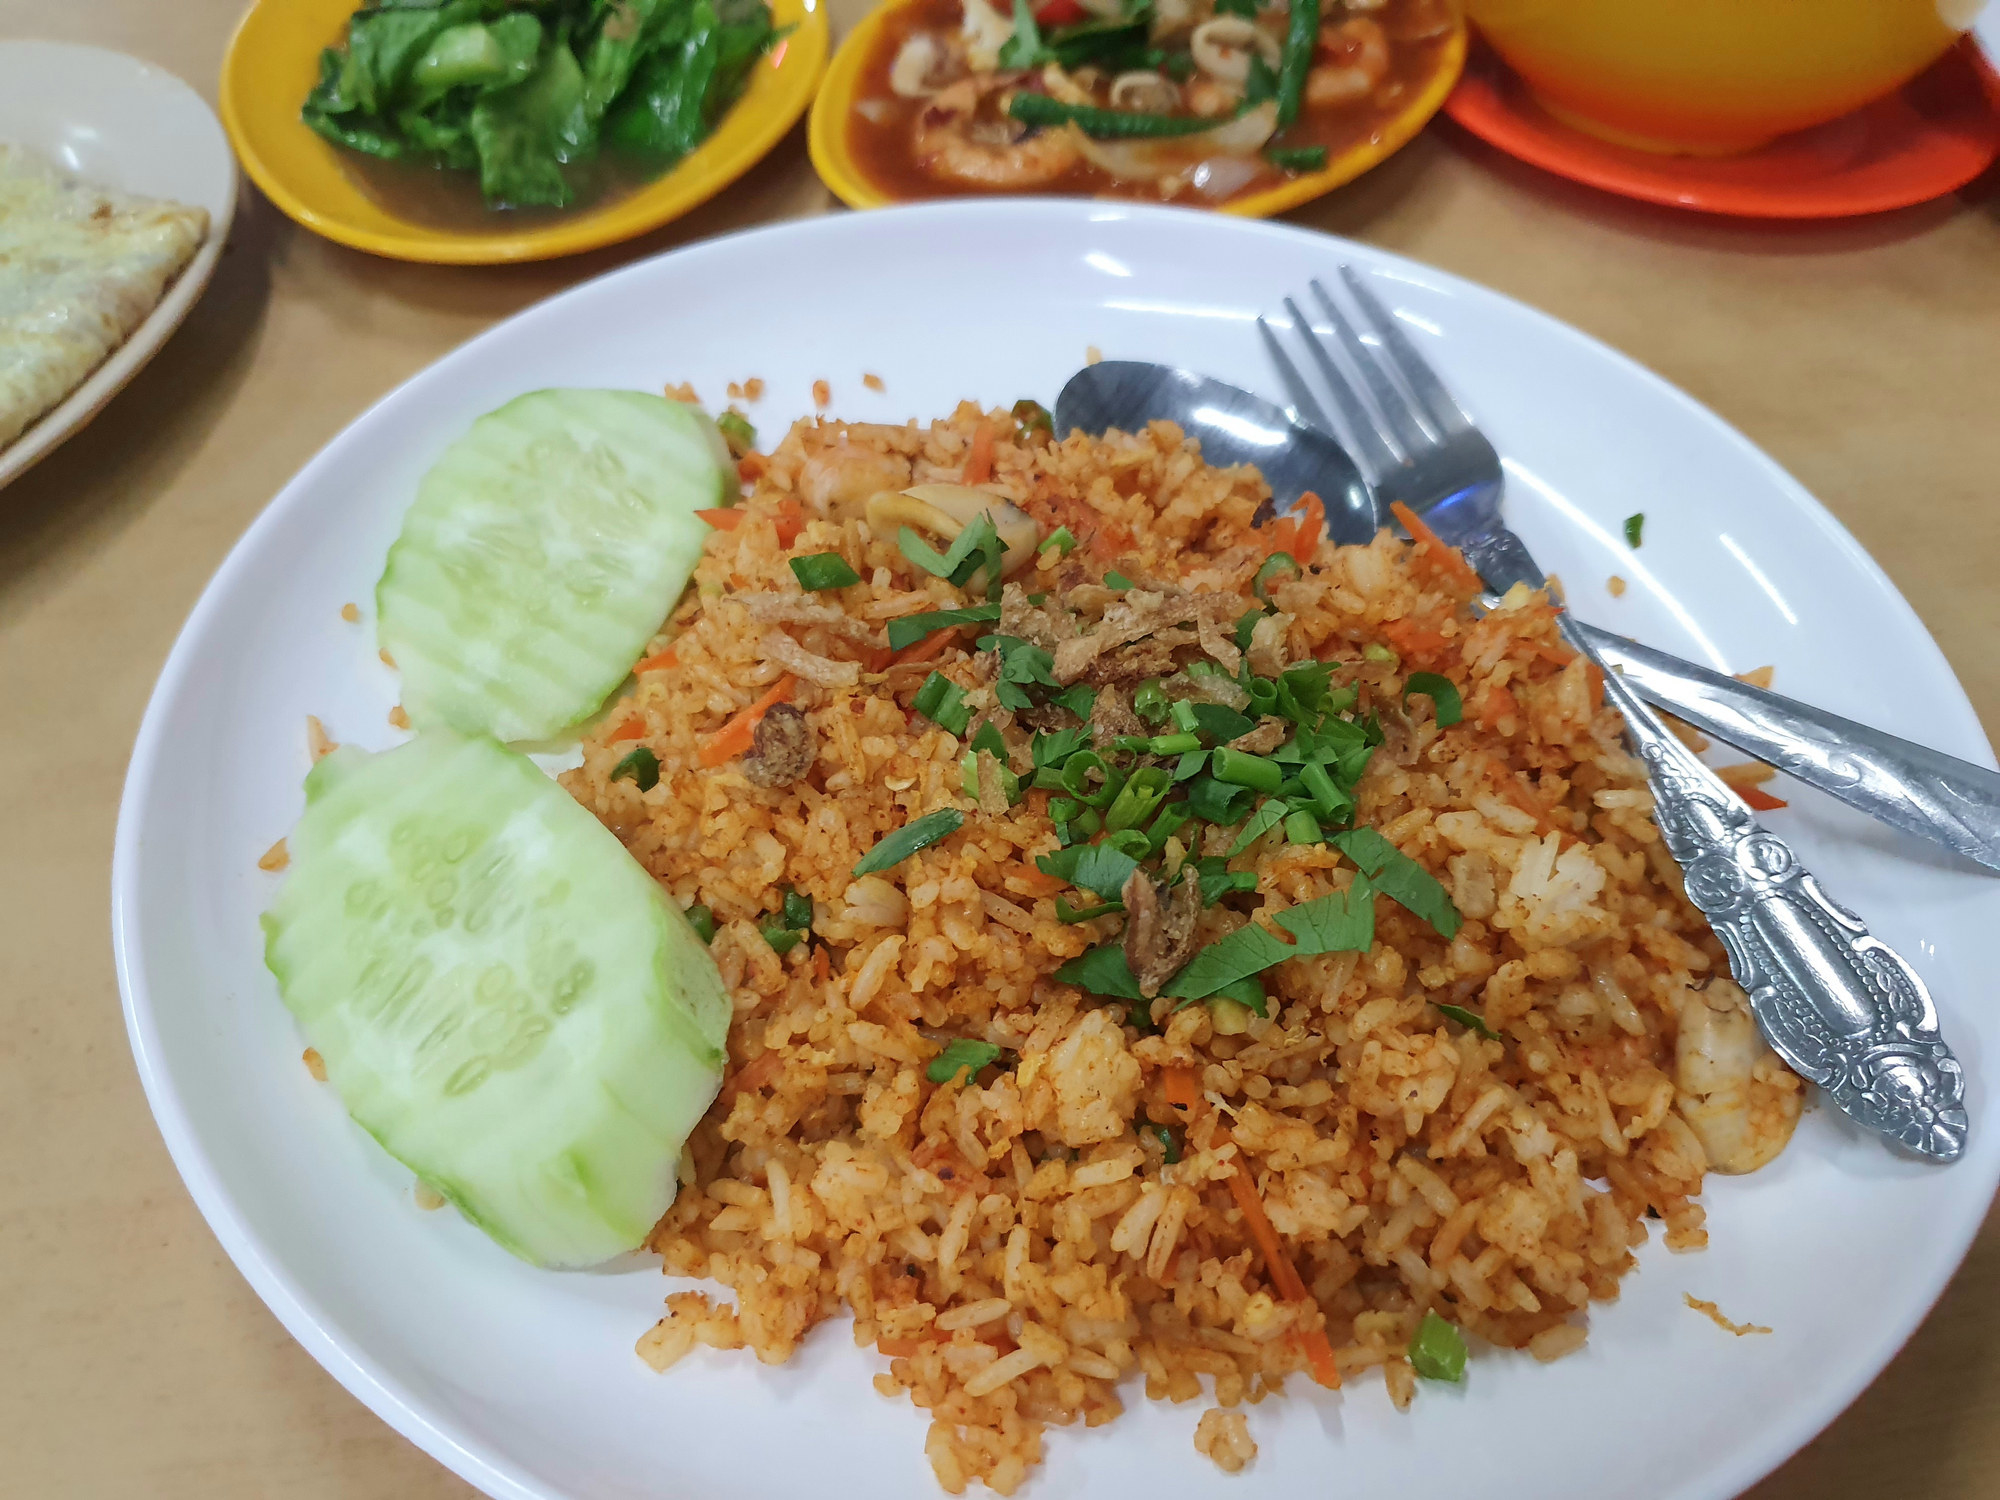 Indonesian fried rice called nasi goreng, served with sliced cucumber